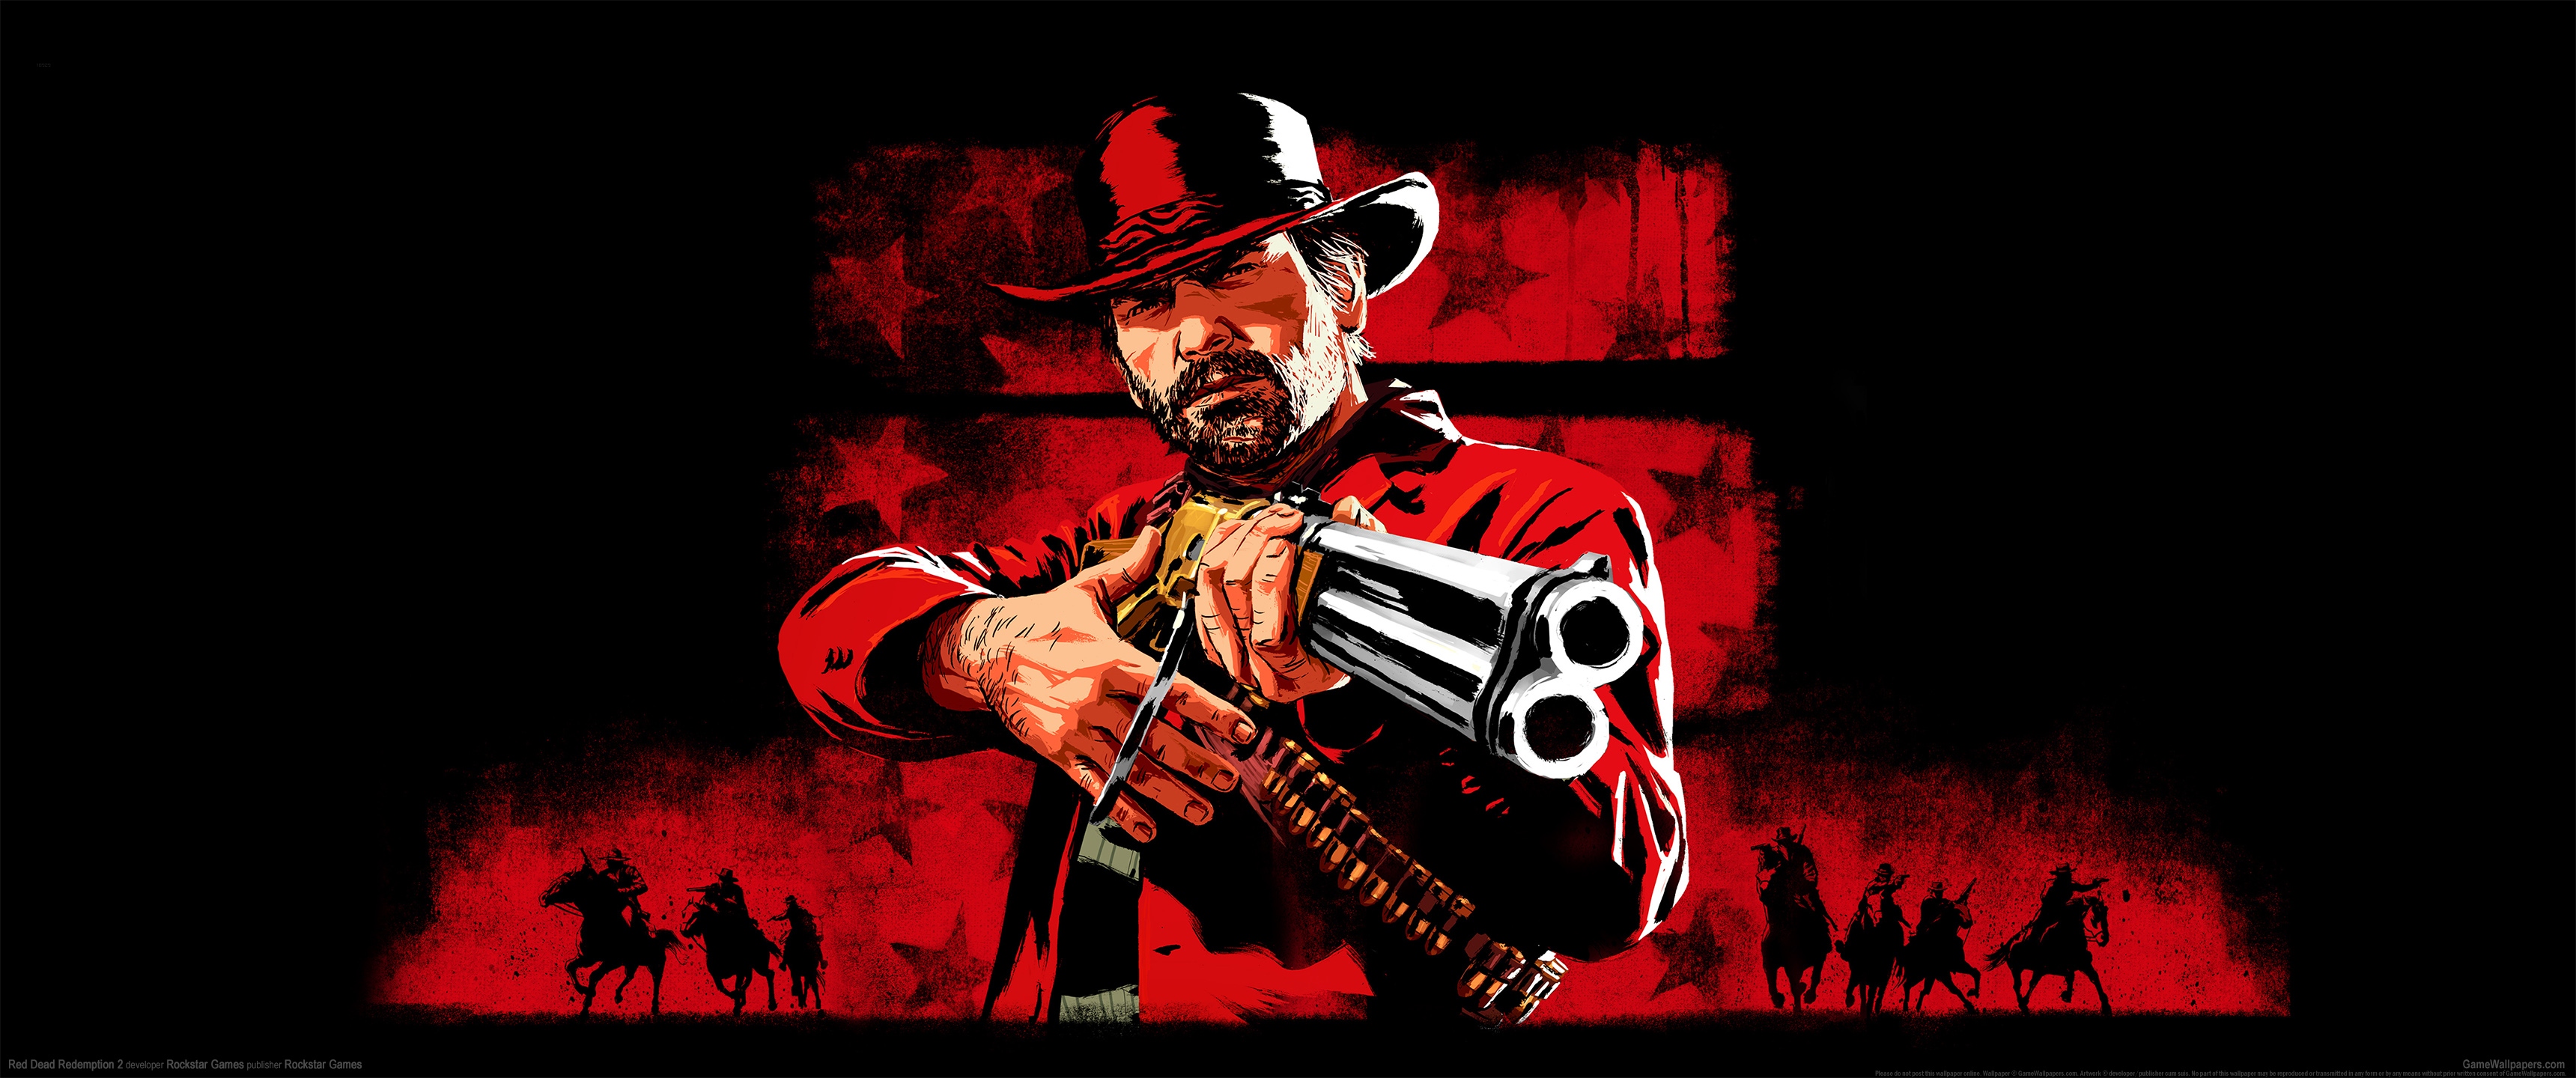 Red Dead Redemption 2 3440x1440 wallpaper or background 04